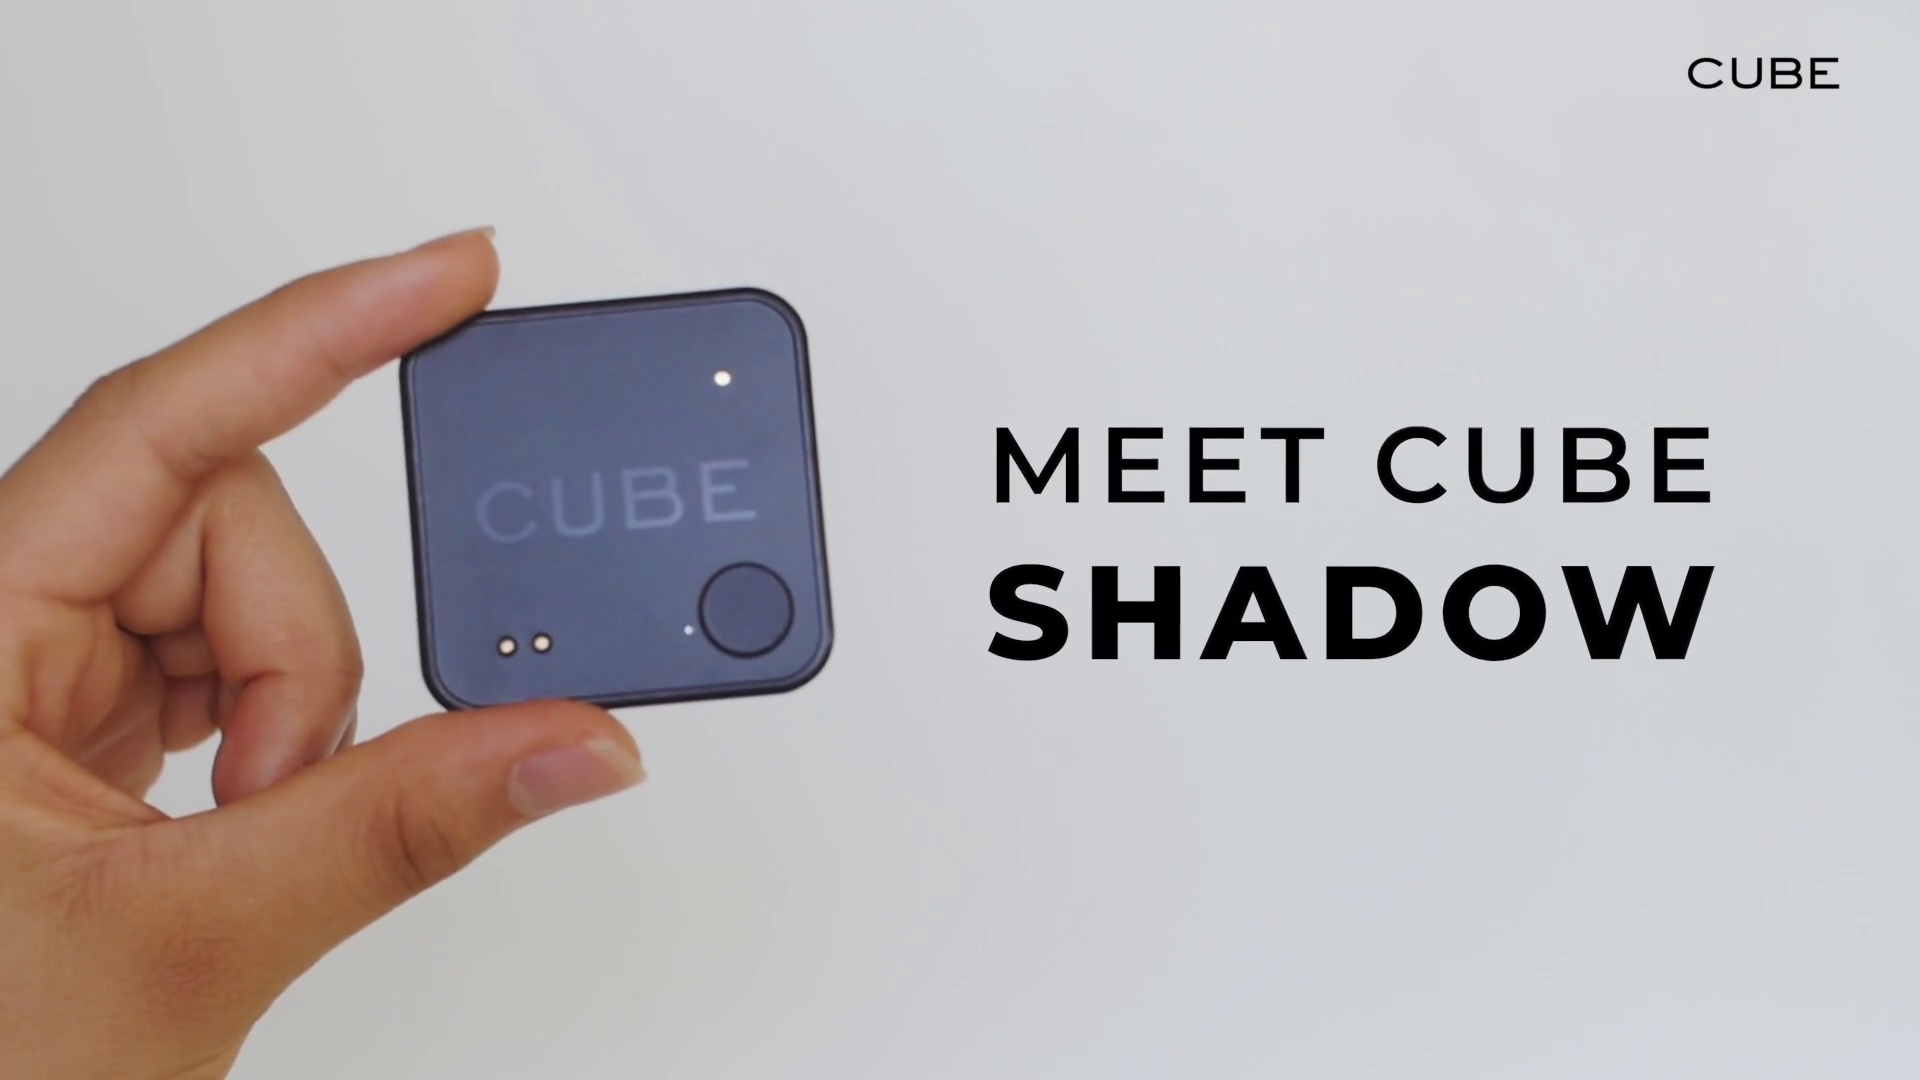 Cube Shadow Item Finder Ultra Thin Rechargeable GPS Phone Battery Wallet Tracker 